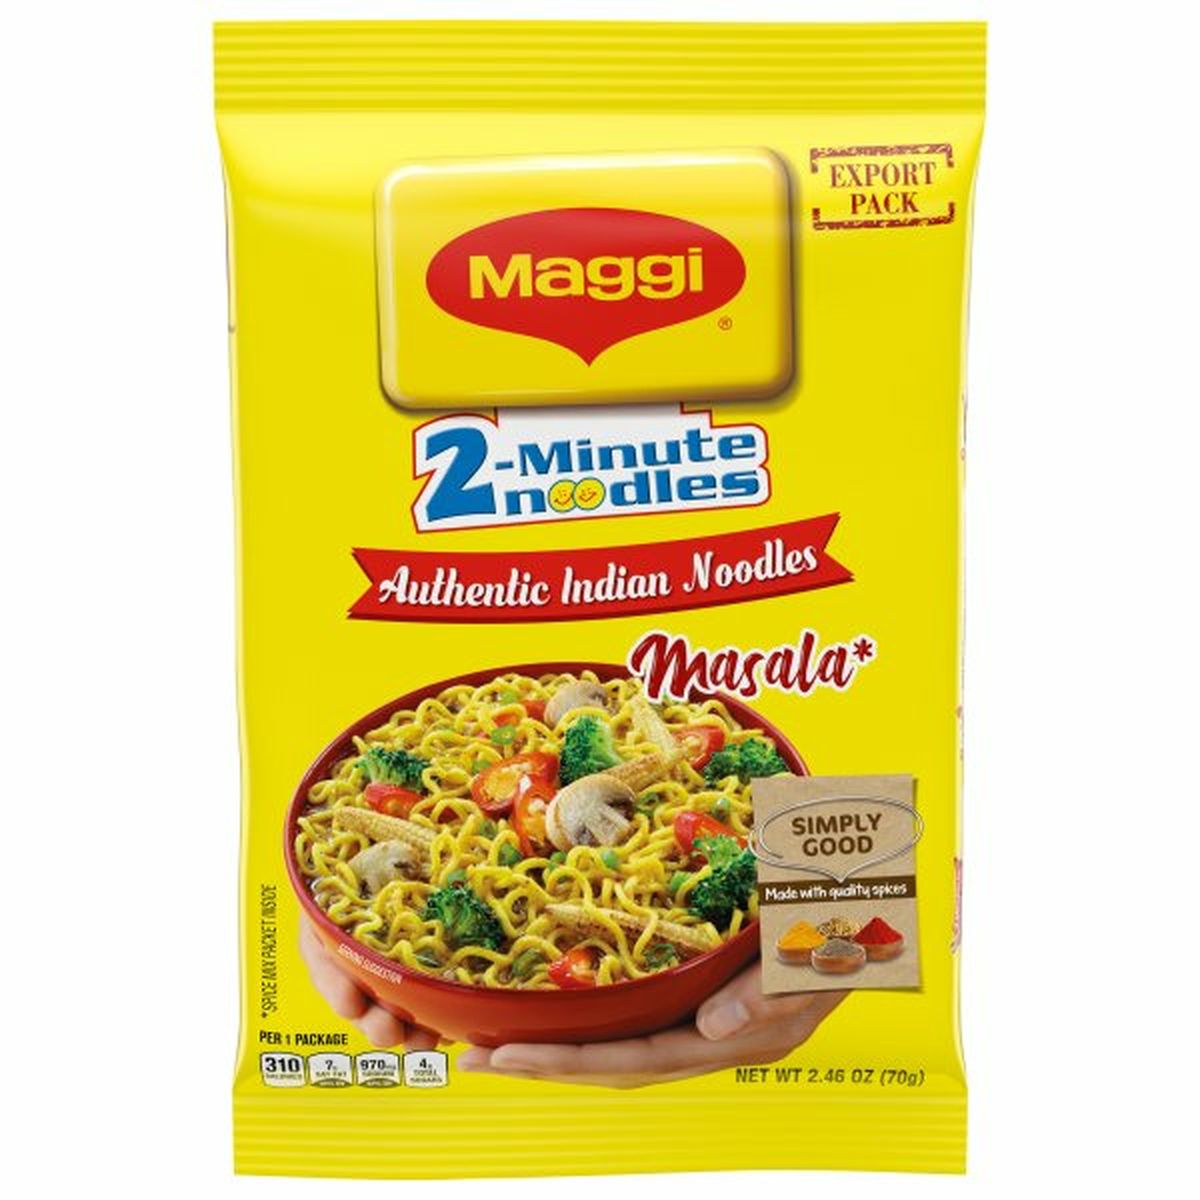 Calories in Maggi Noodles, Masala, 2-Minute, Export Pack